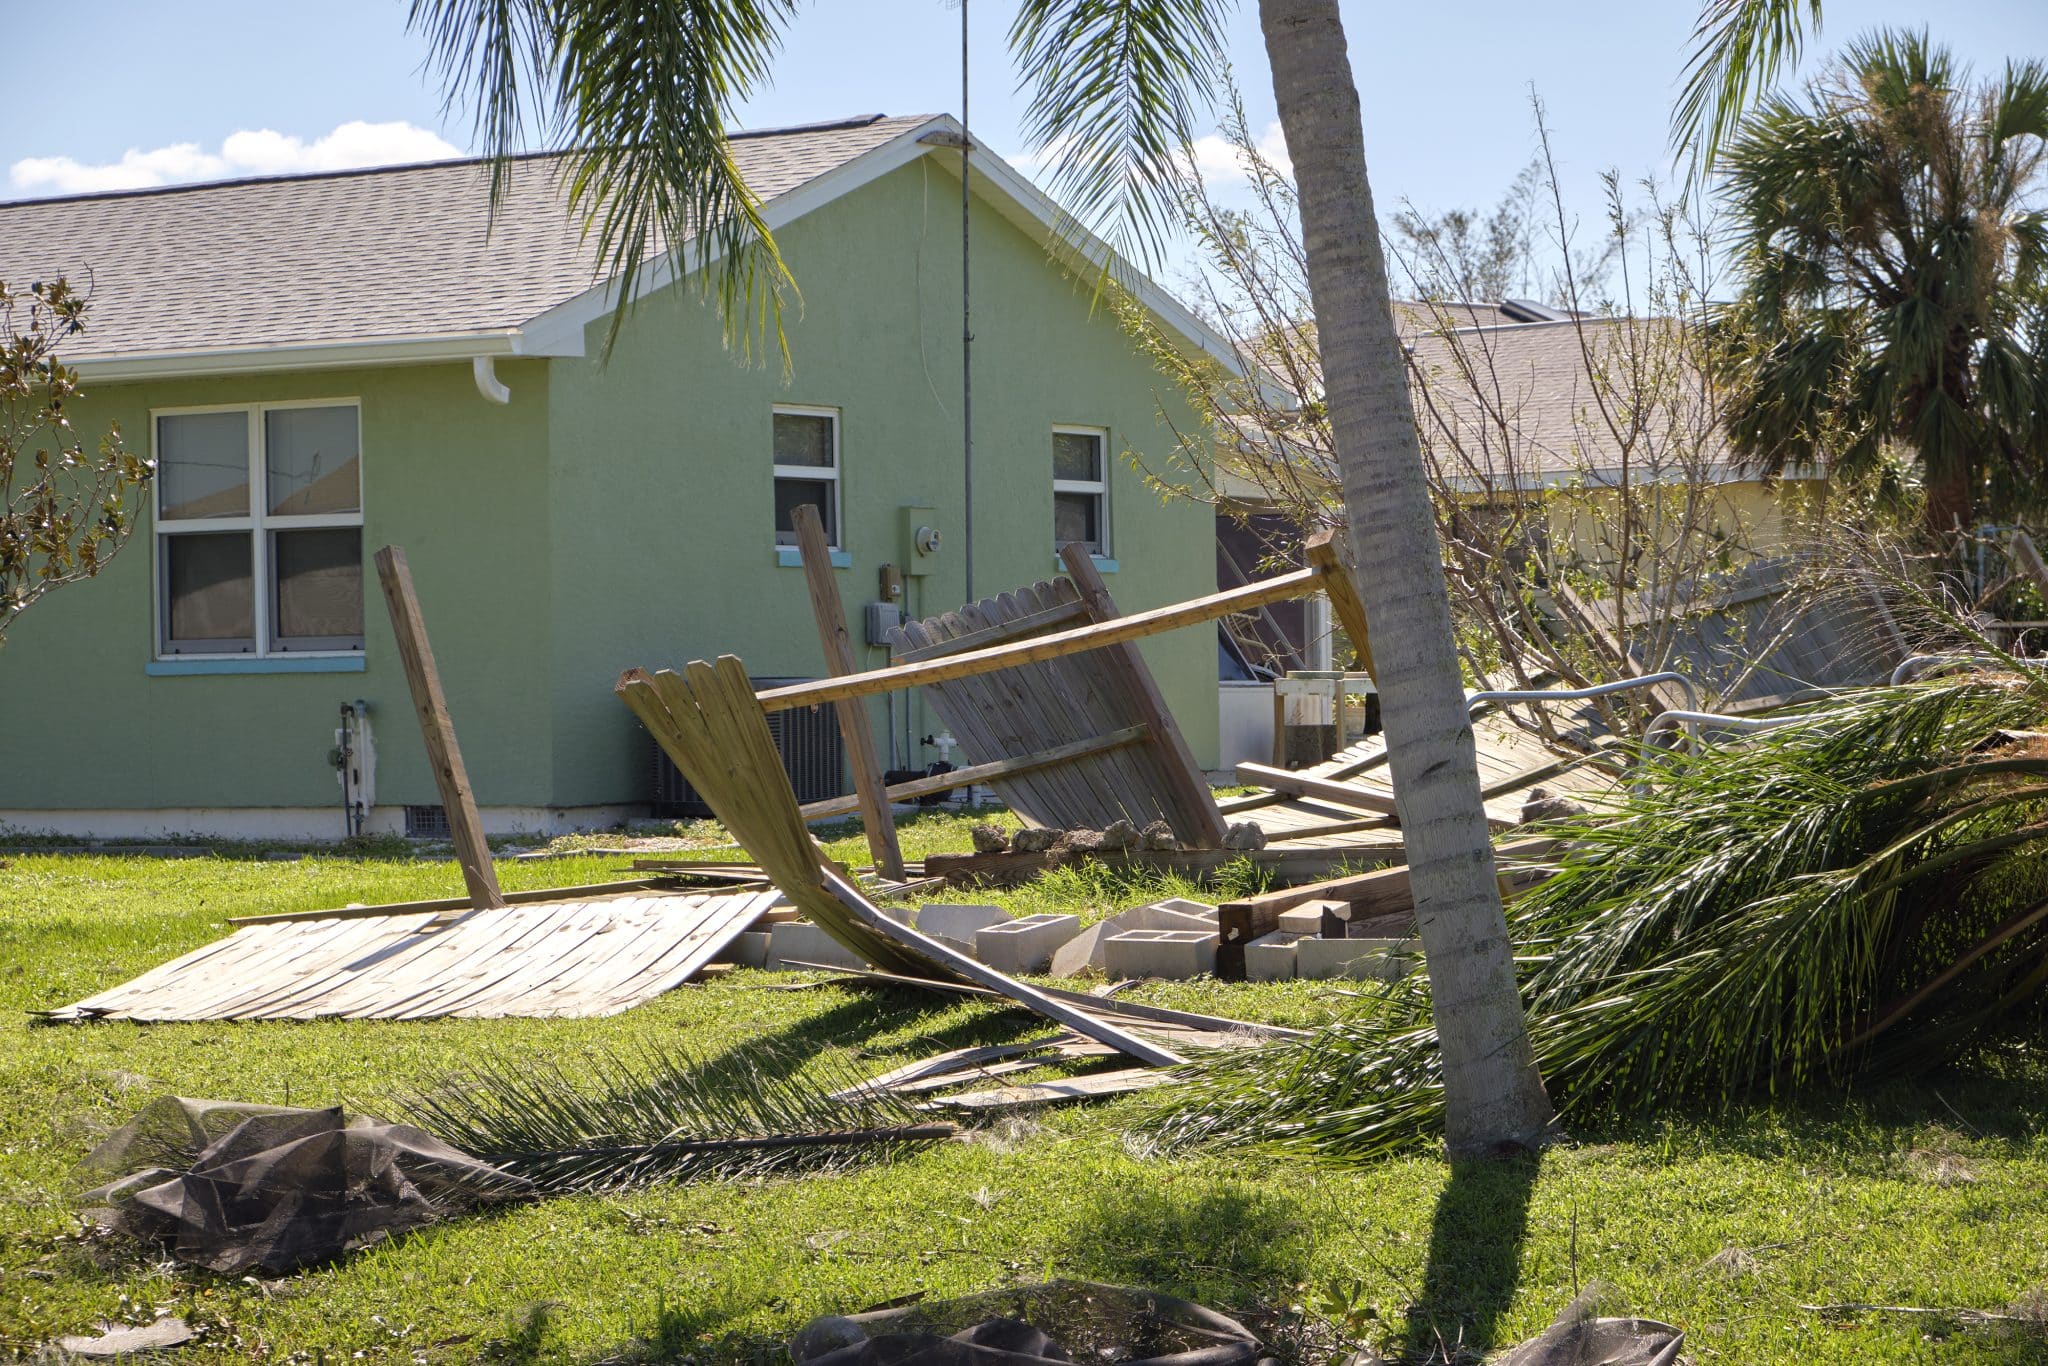 Home yard with scattered debris after hurricane Ian in Florida.